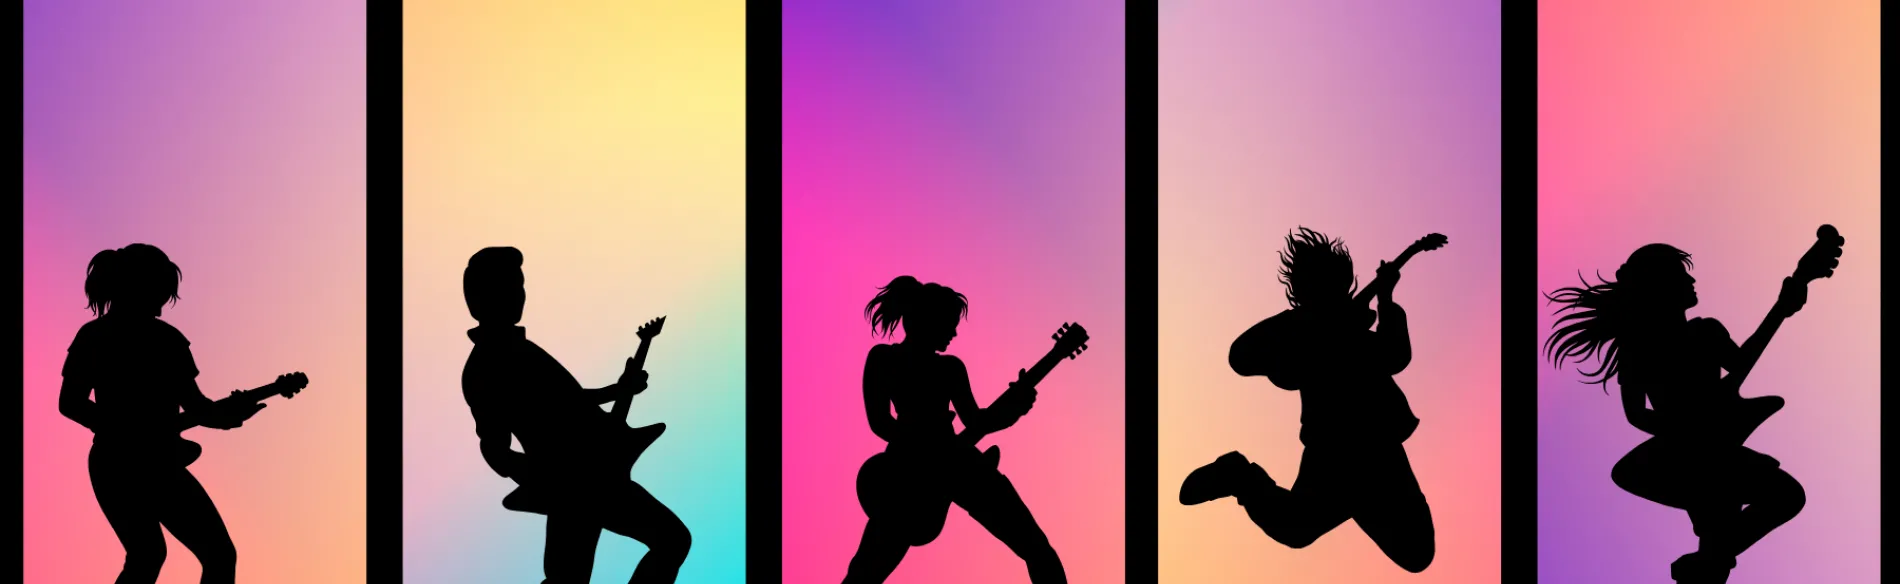 An image of five guitar players in silhouette against a colorful background.